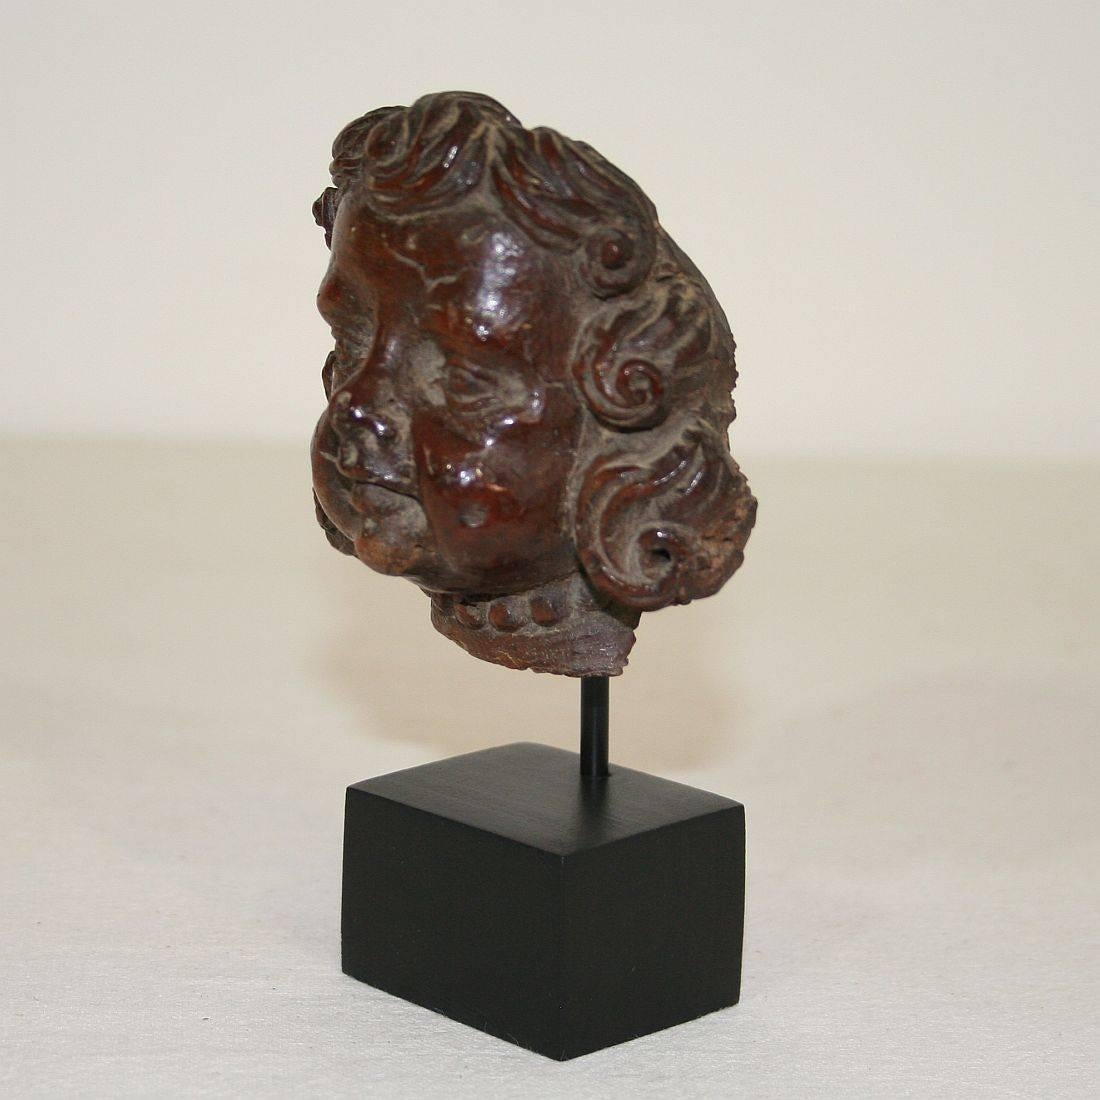 Hand-Carved Small French 17th-18th Century Baroque Carved Wooden Angel Face